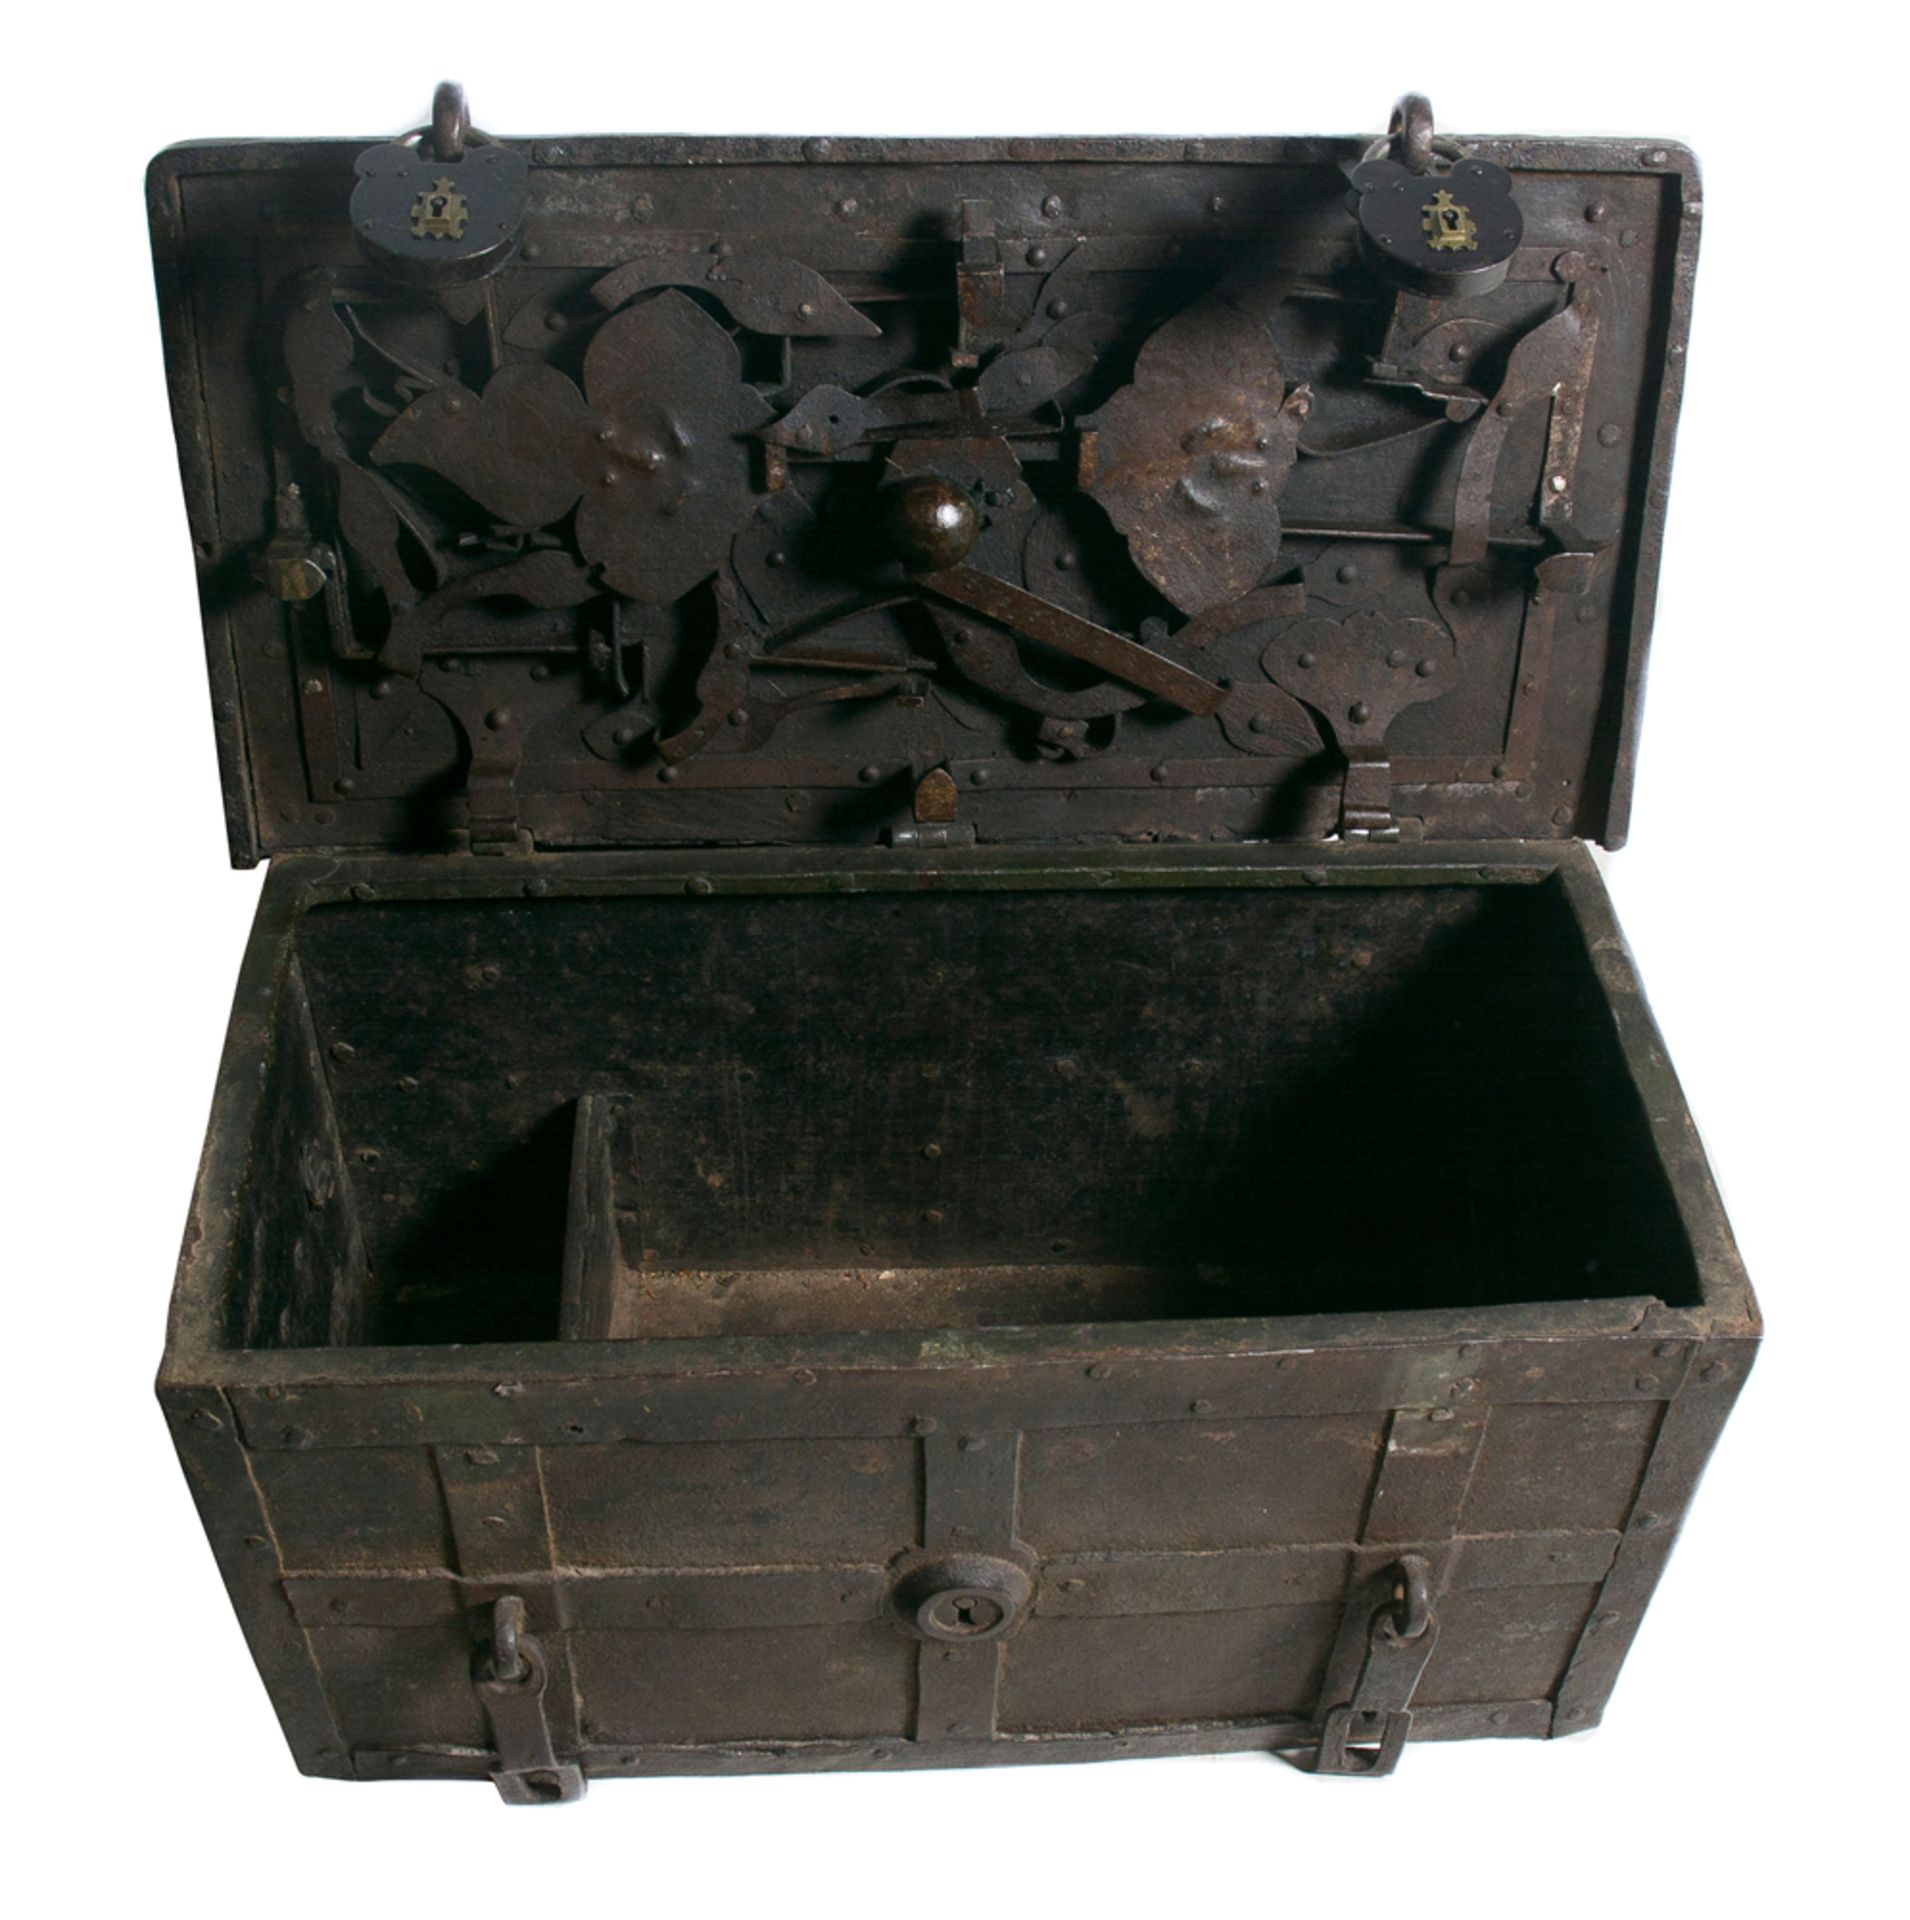 Wrought iron strong box. Nuremberg or Augsburg. Late 16th century. - Image 3 of 6